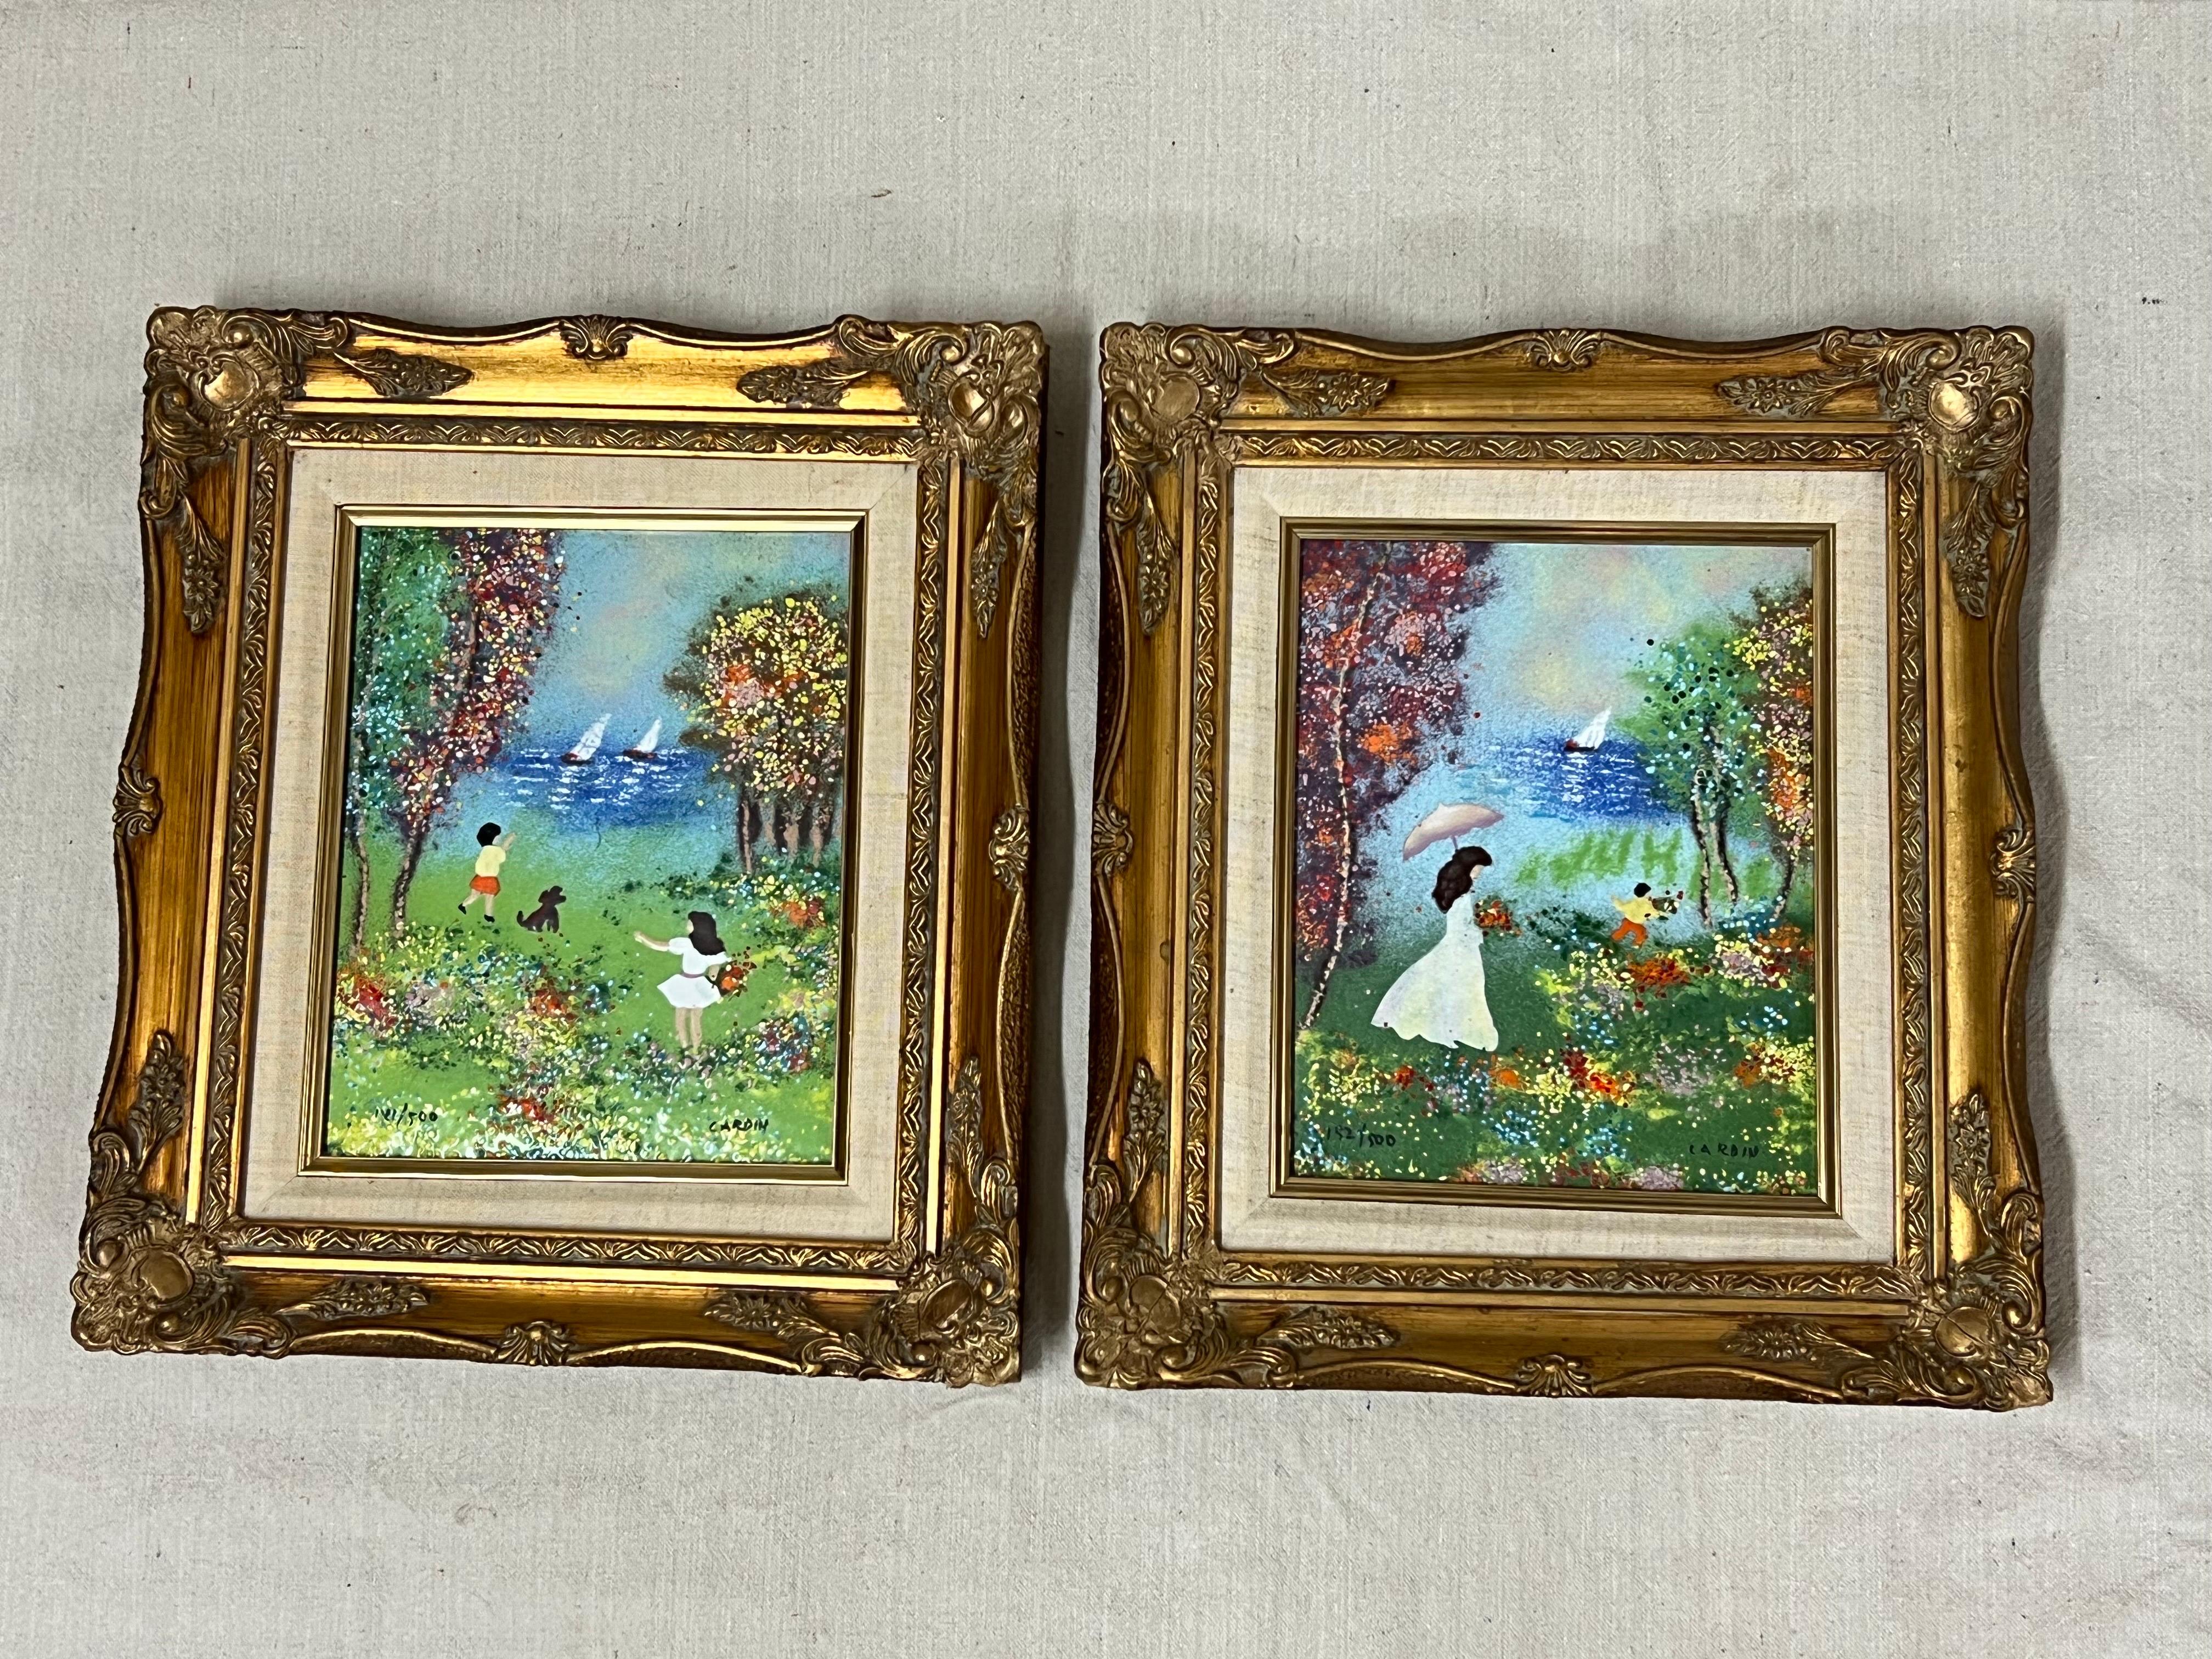 Pair of vintage signed original framed enamel on copper art panels by Louis Cardin. 
Very popular collectible items Circa 1970. Collector's Guild Ltd Certificate of Authenticity on the back of each panel. The first art panel depicts two children ,